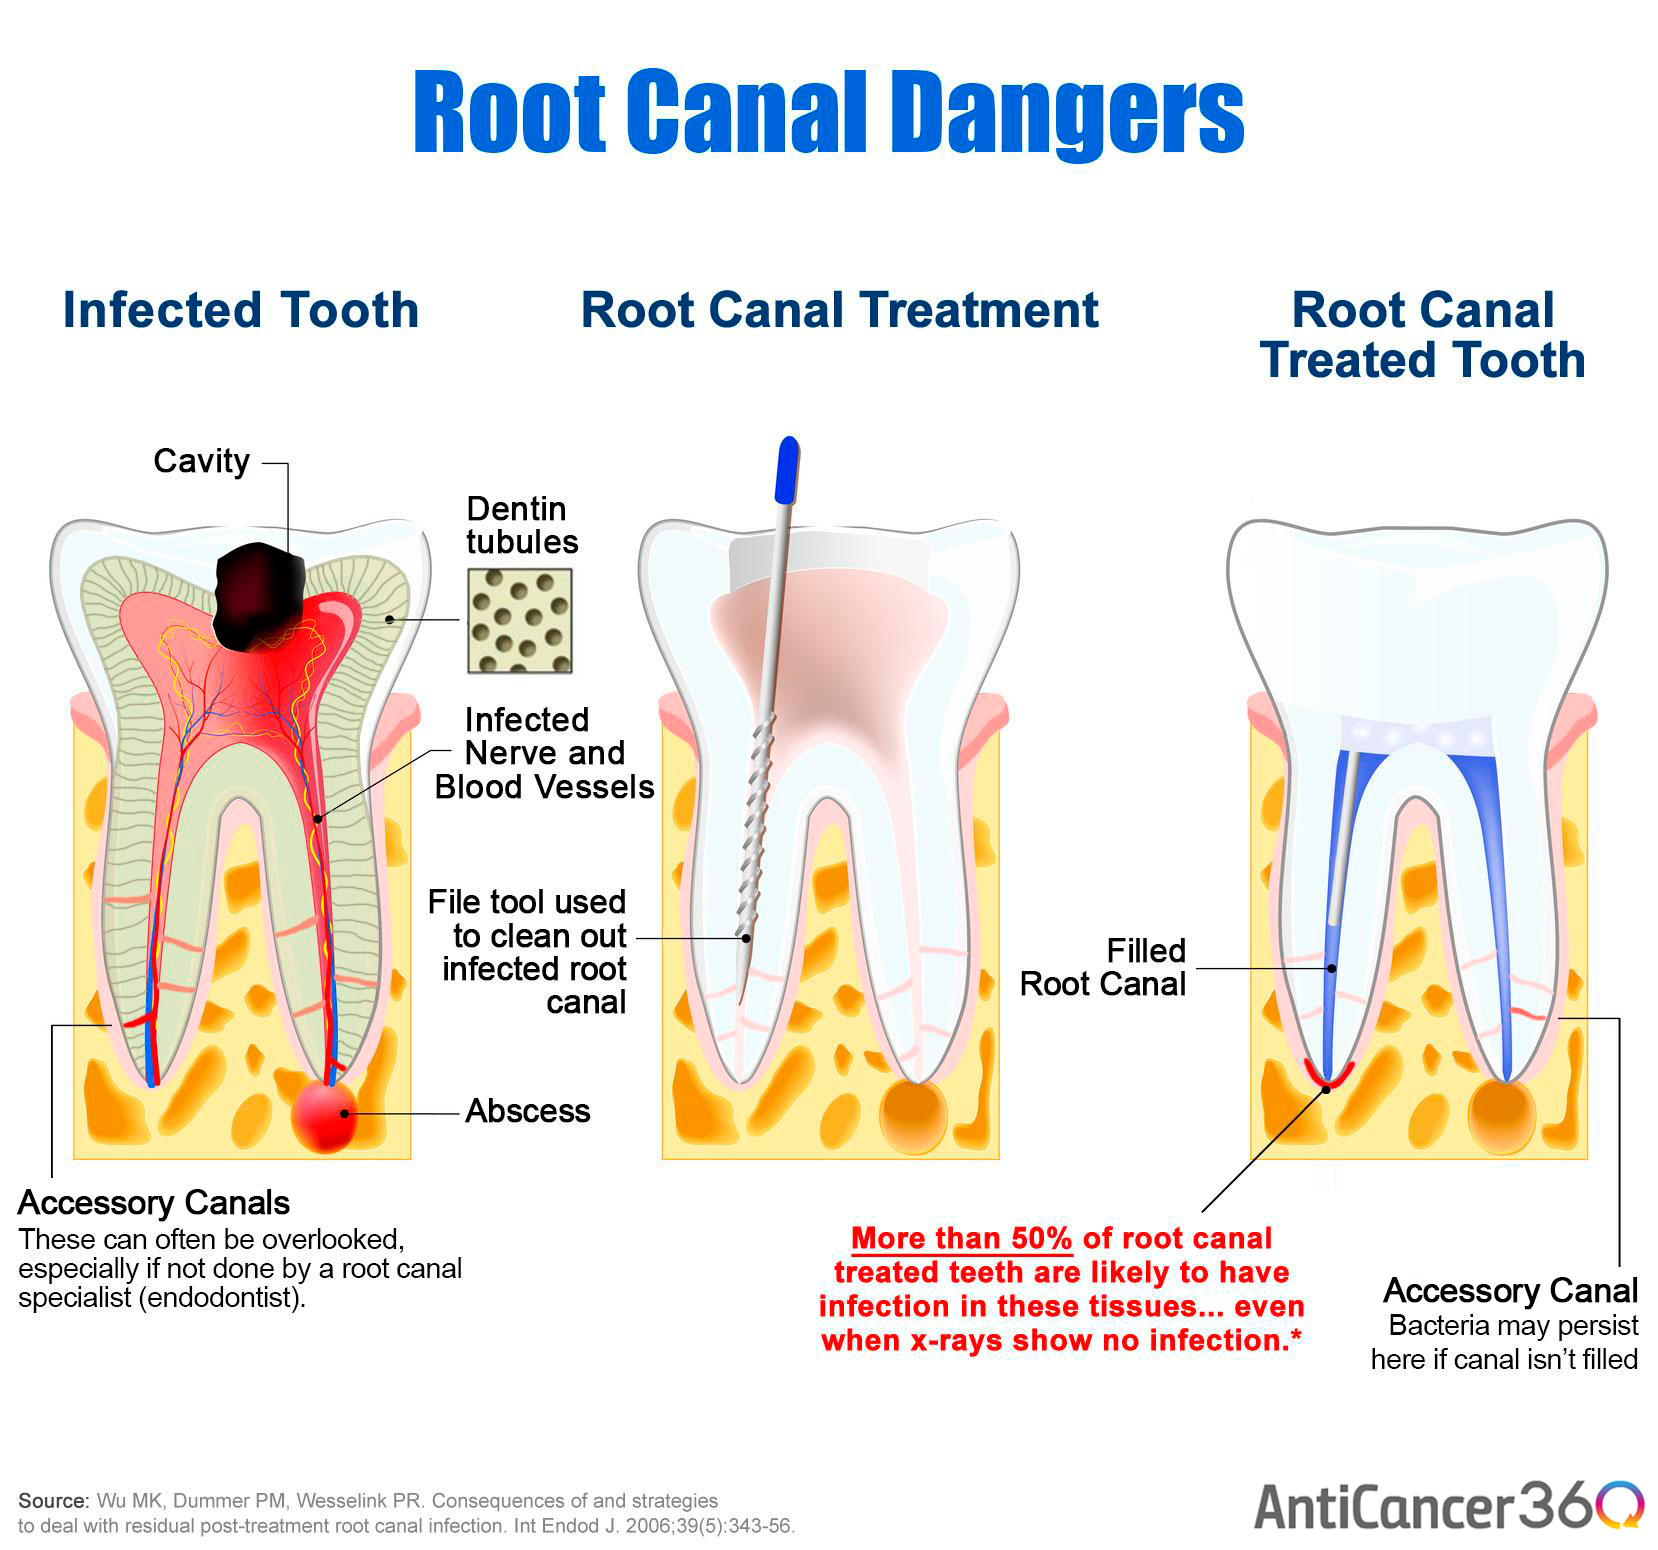 What You Need To Know About Root Canals And Cancer (Science)